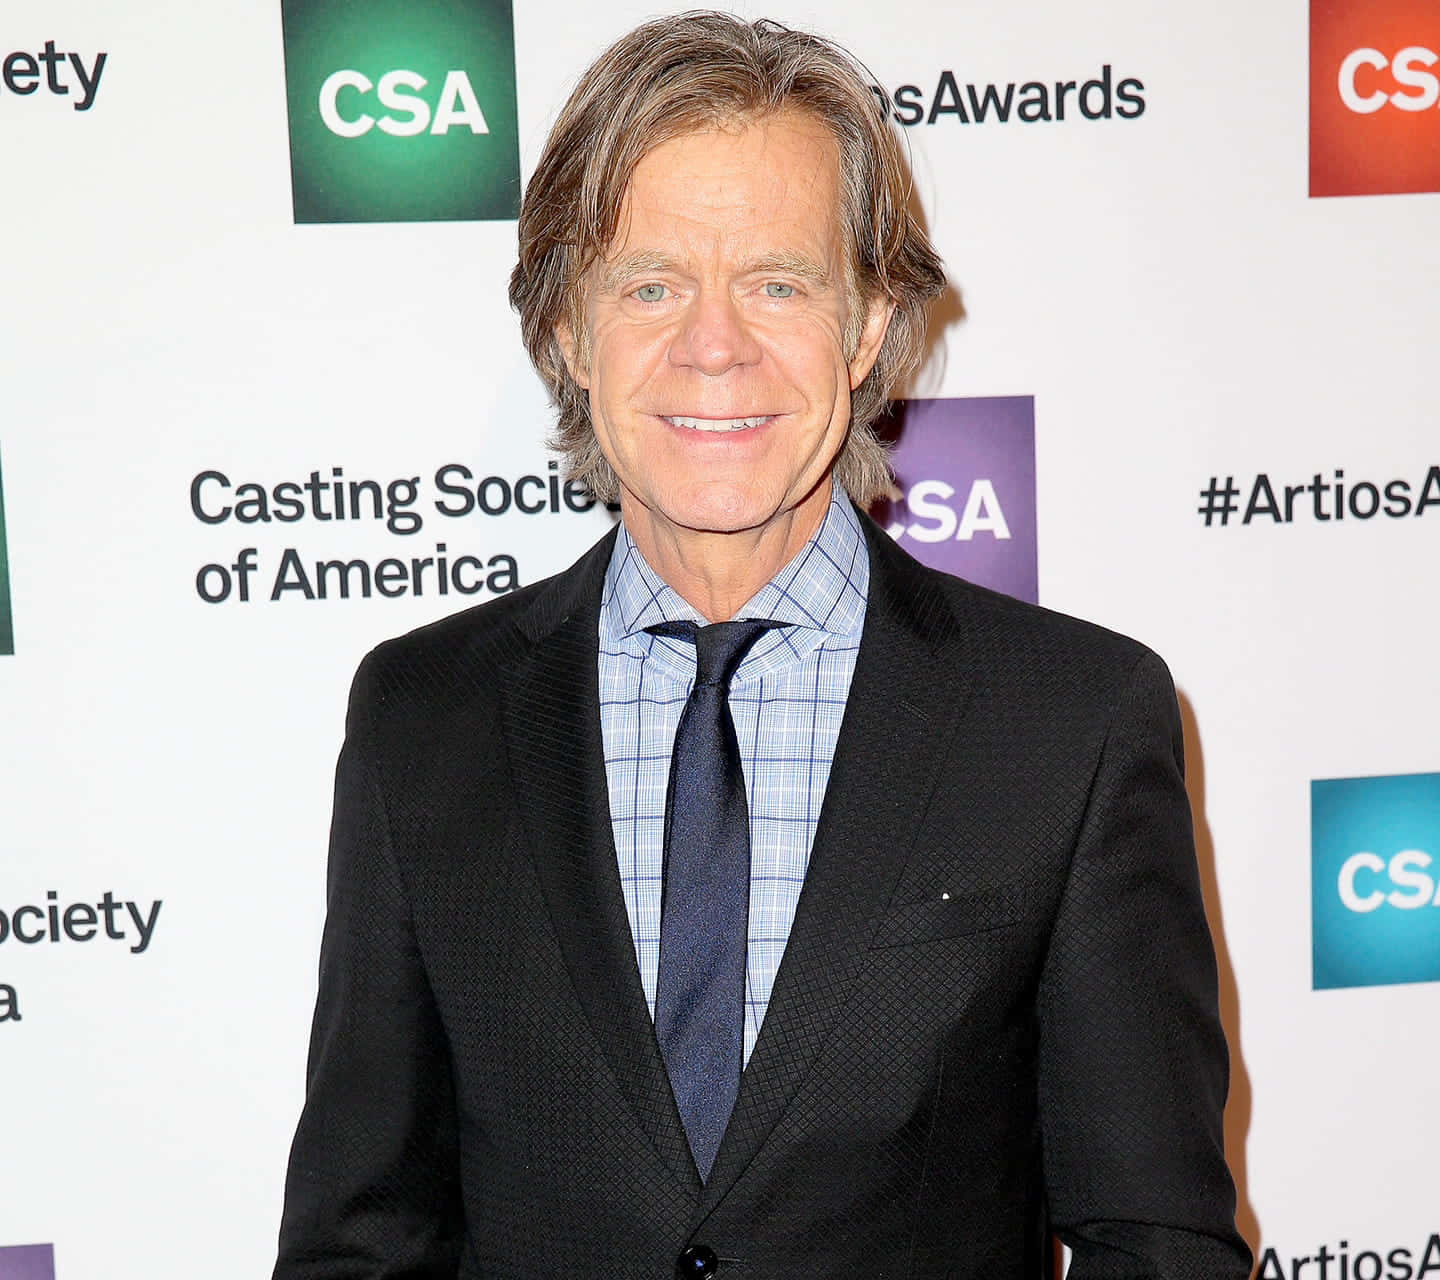 A portrait of William H. Macy, the talented American actor and director Wallpaper